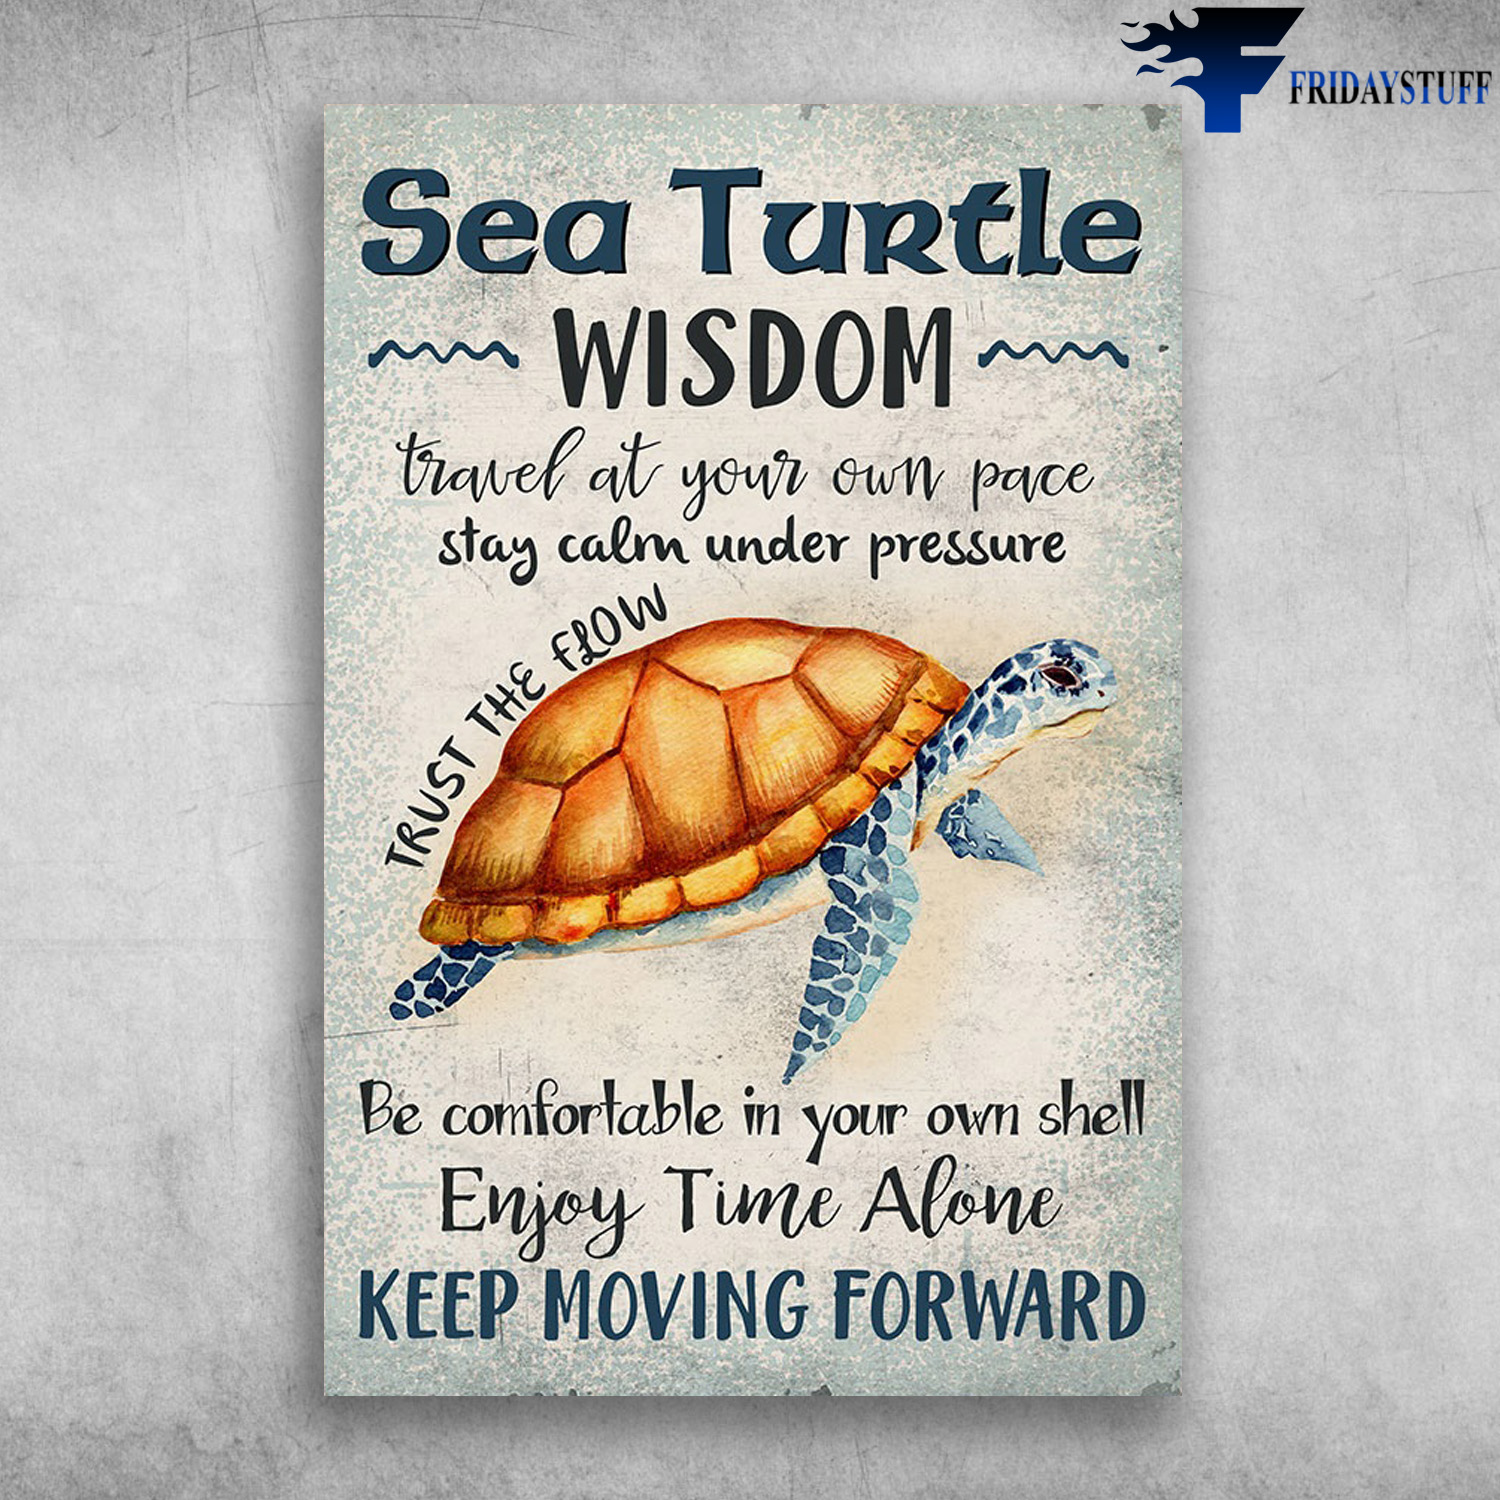 Sea Turtle Wisdom - Travel At Your Own Pace, Stay Calm Under Pressure, Trust The Flow, Be Comfortable In Your Own Shell, Enjoy Time Alone, Keep Moving Forward